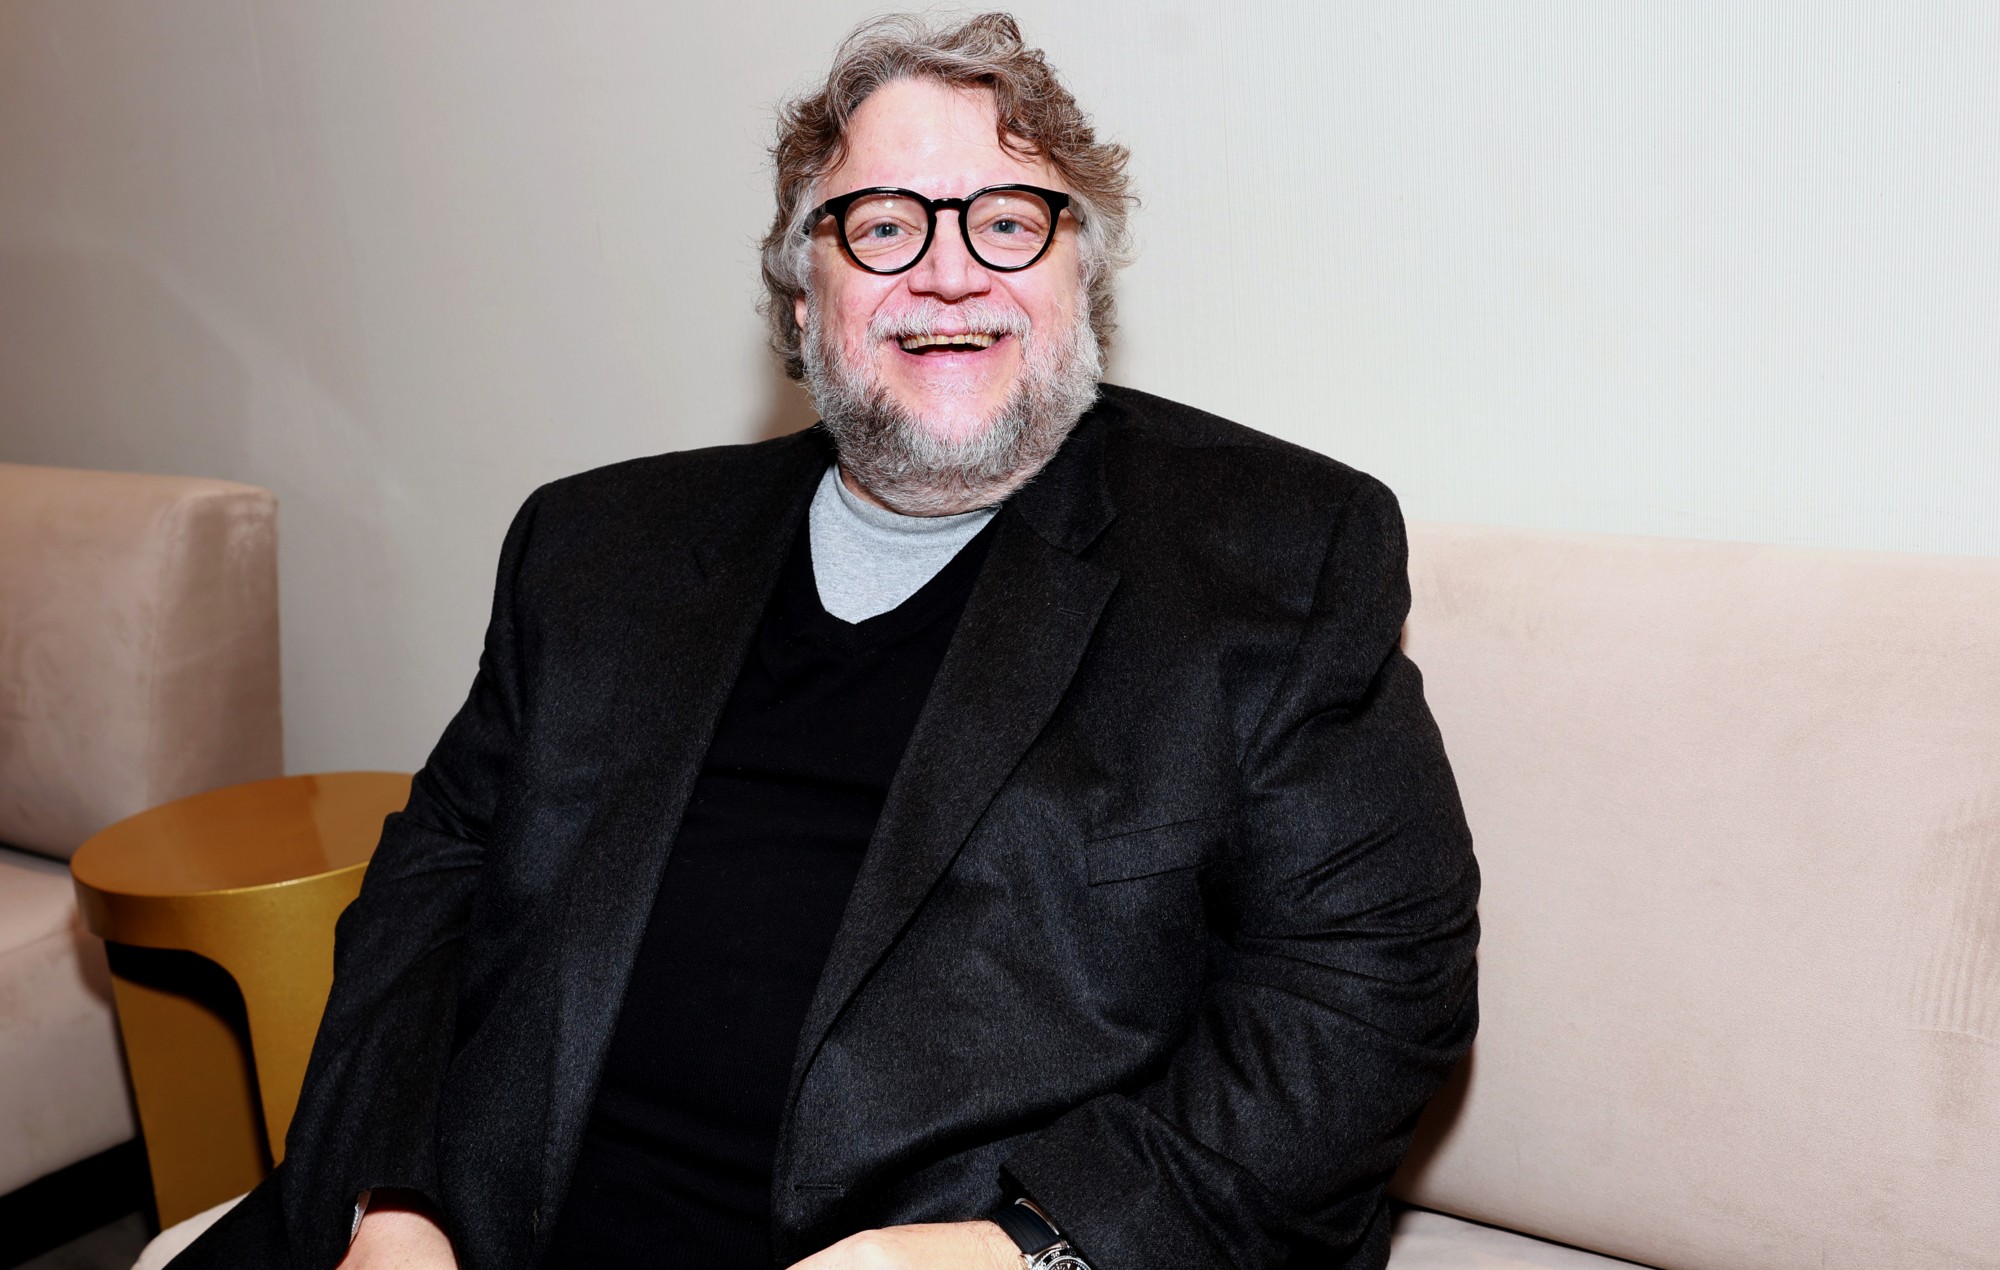 Guillermo del Toro wants you to watch these horror movies this Halloween